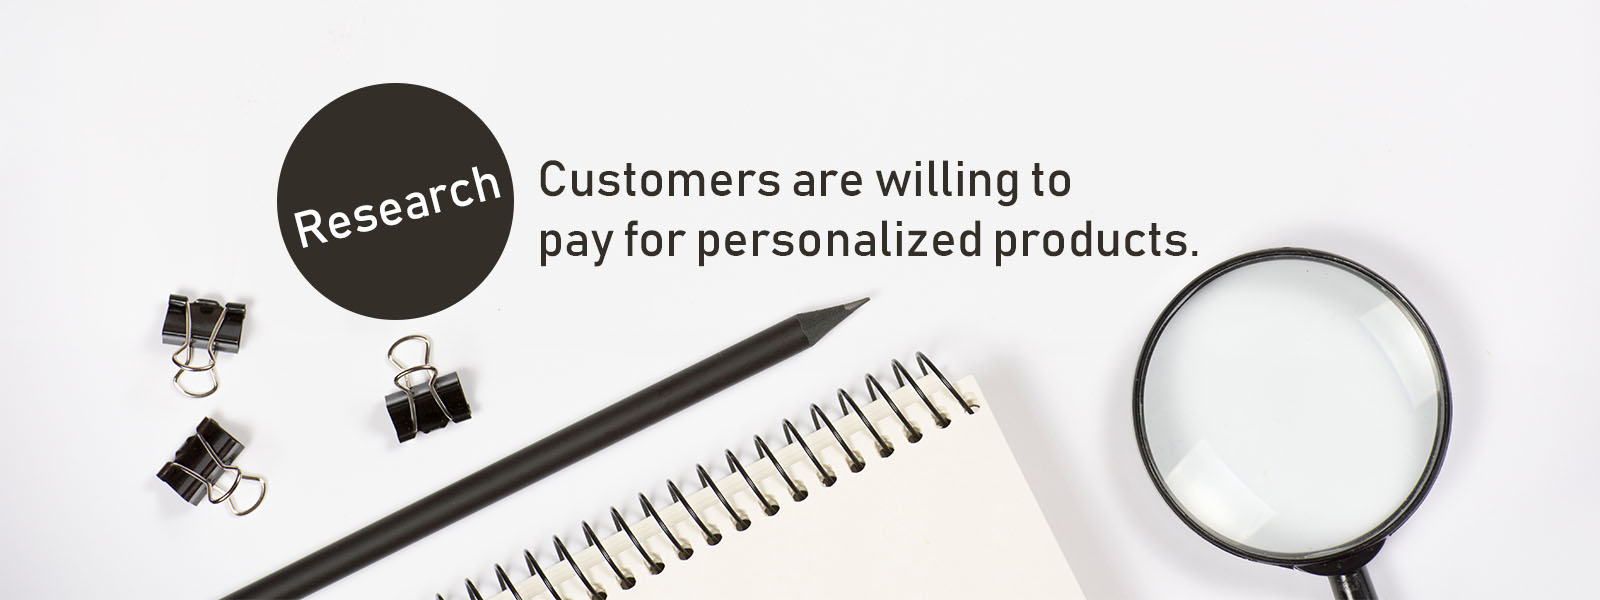 Customers are willing to pay for personalized products